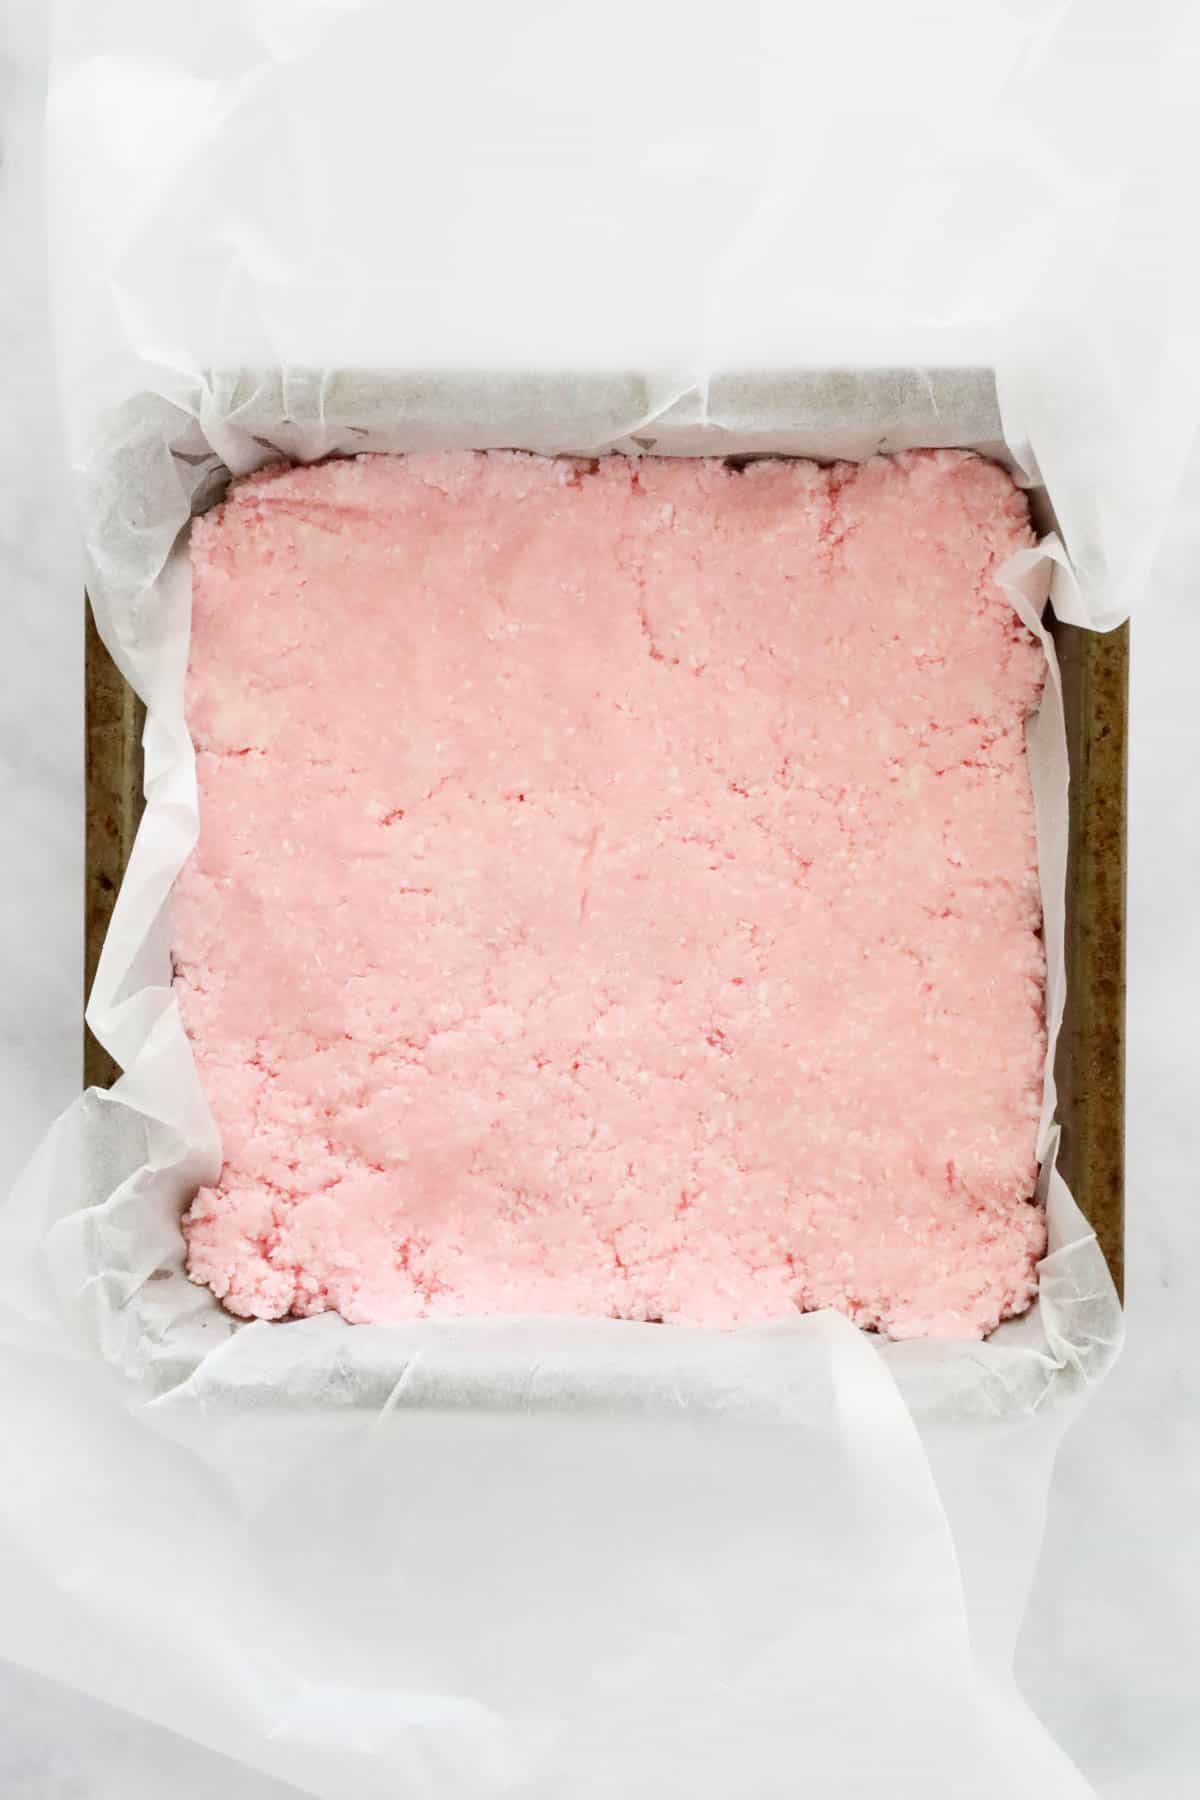 Pink coconut mixture pressed into a baking tin.